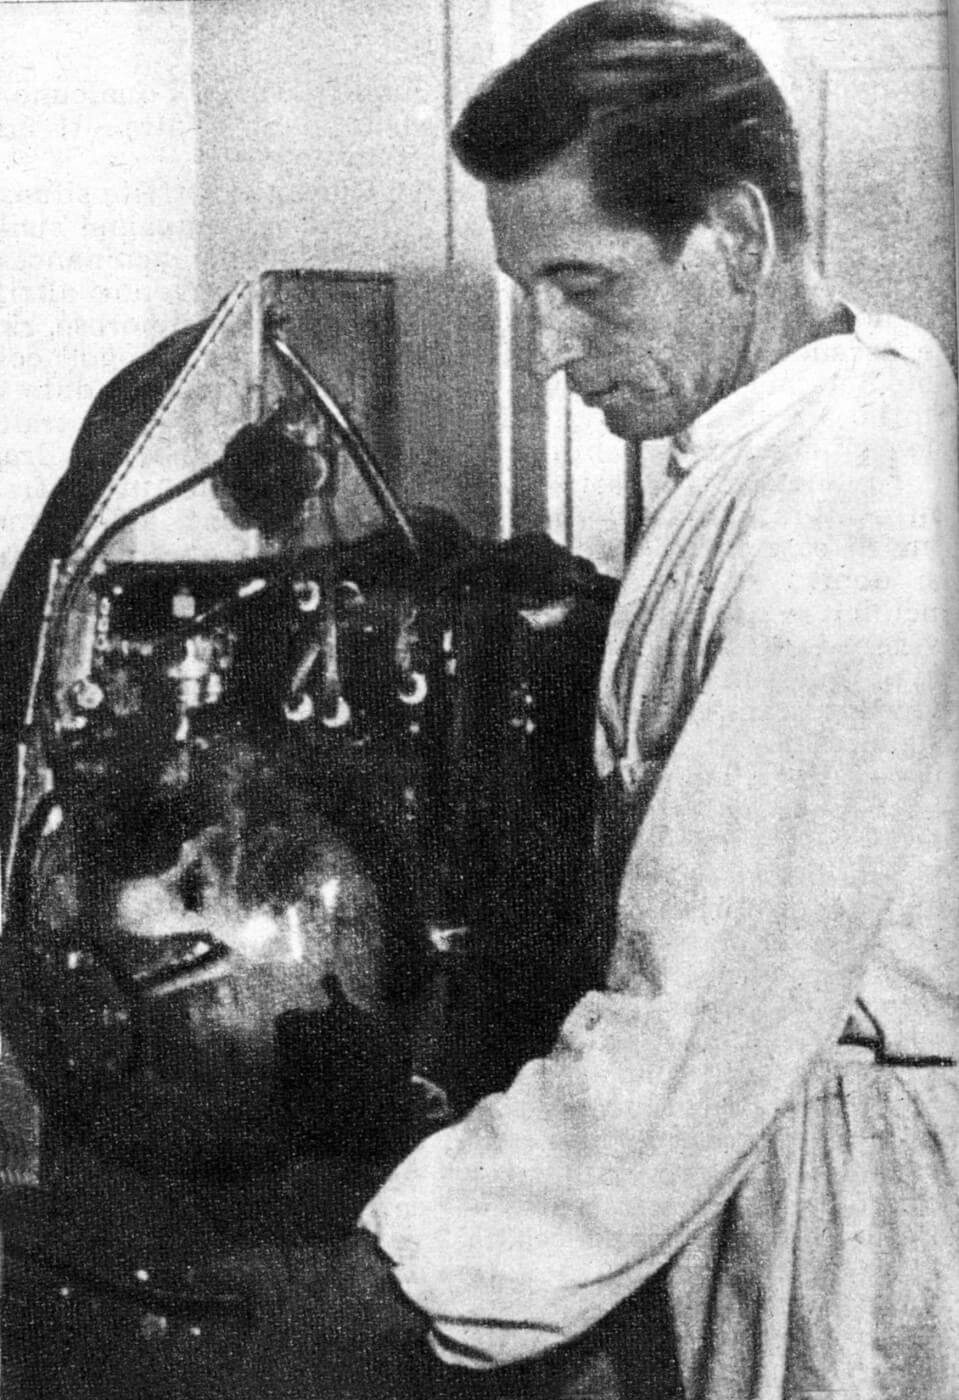 From Sovietic Center for the Space Research, Laika prepares for the space mission experiments